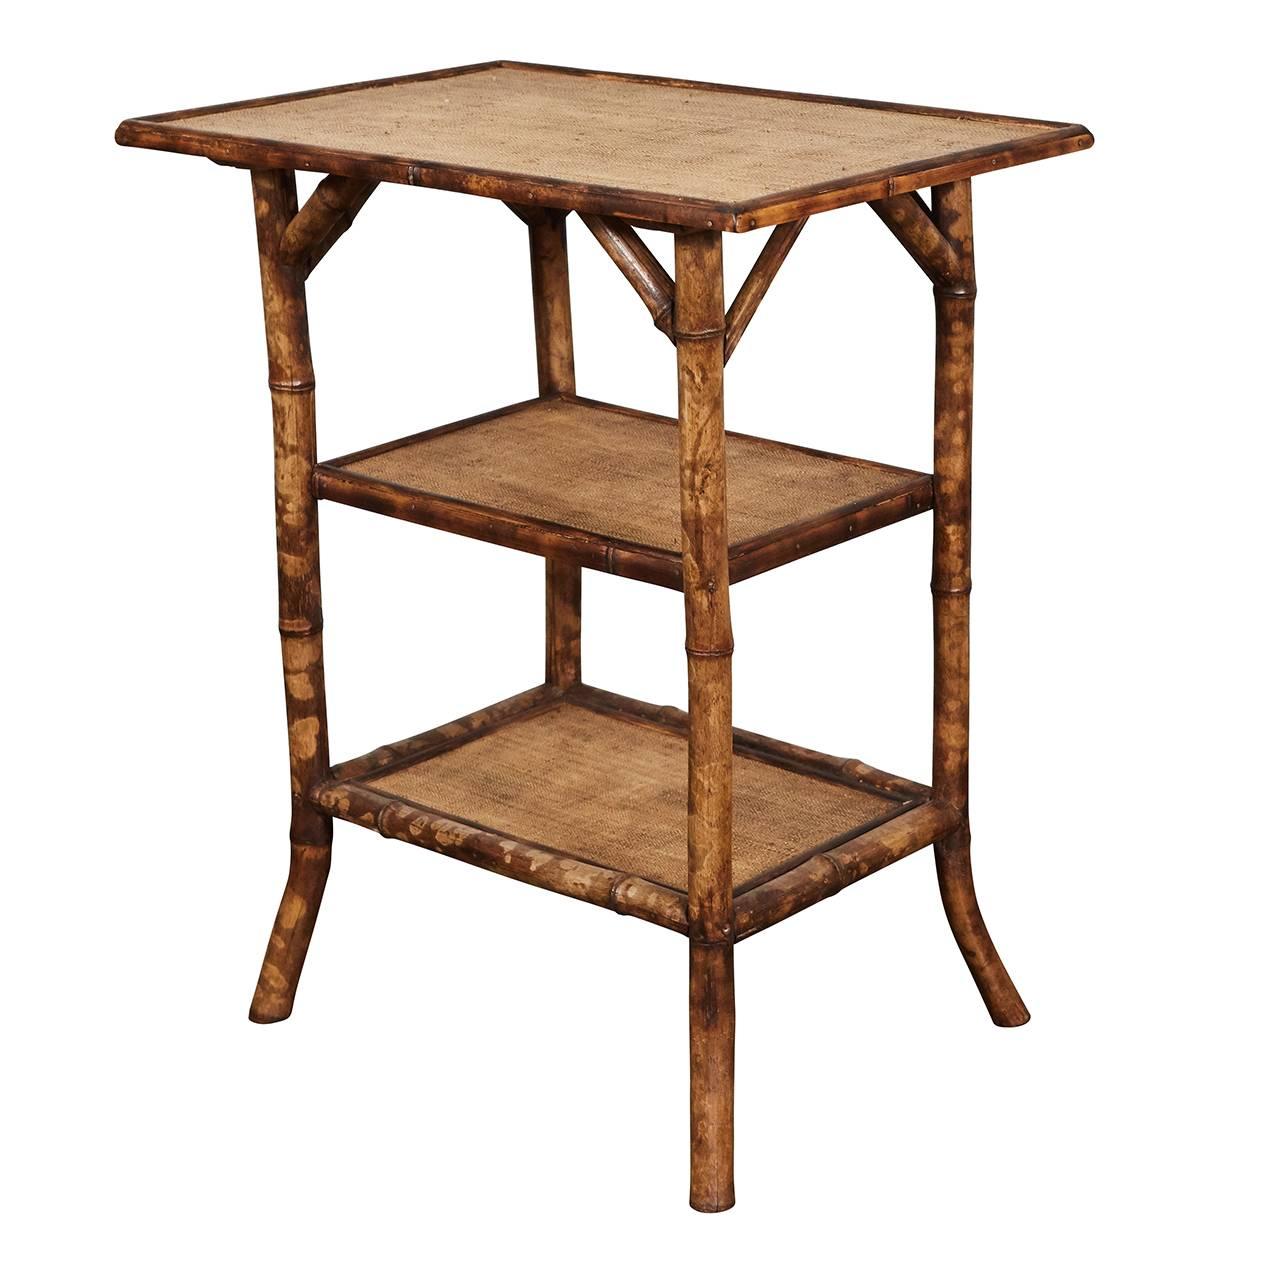 This English Victorian side table is made of tiger bamboo with refurbished waxed raffia matting surfaces. The piece has angled supports, two shelves and nicely out-turned feet. The legs have been reinforced with dowels for increased sturdiness. We